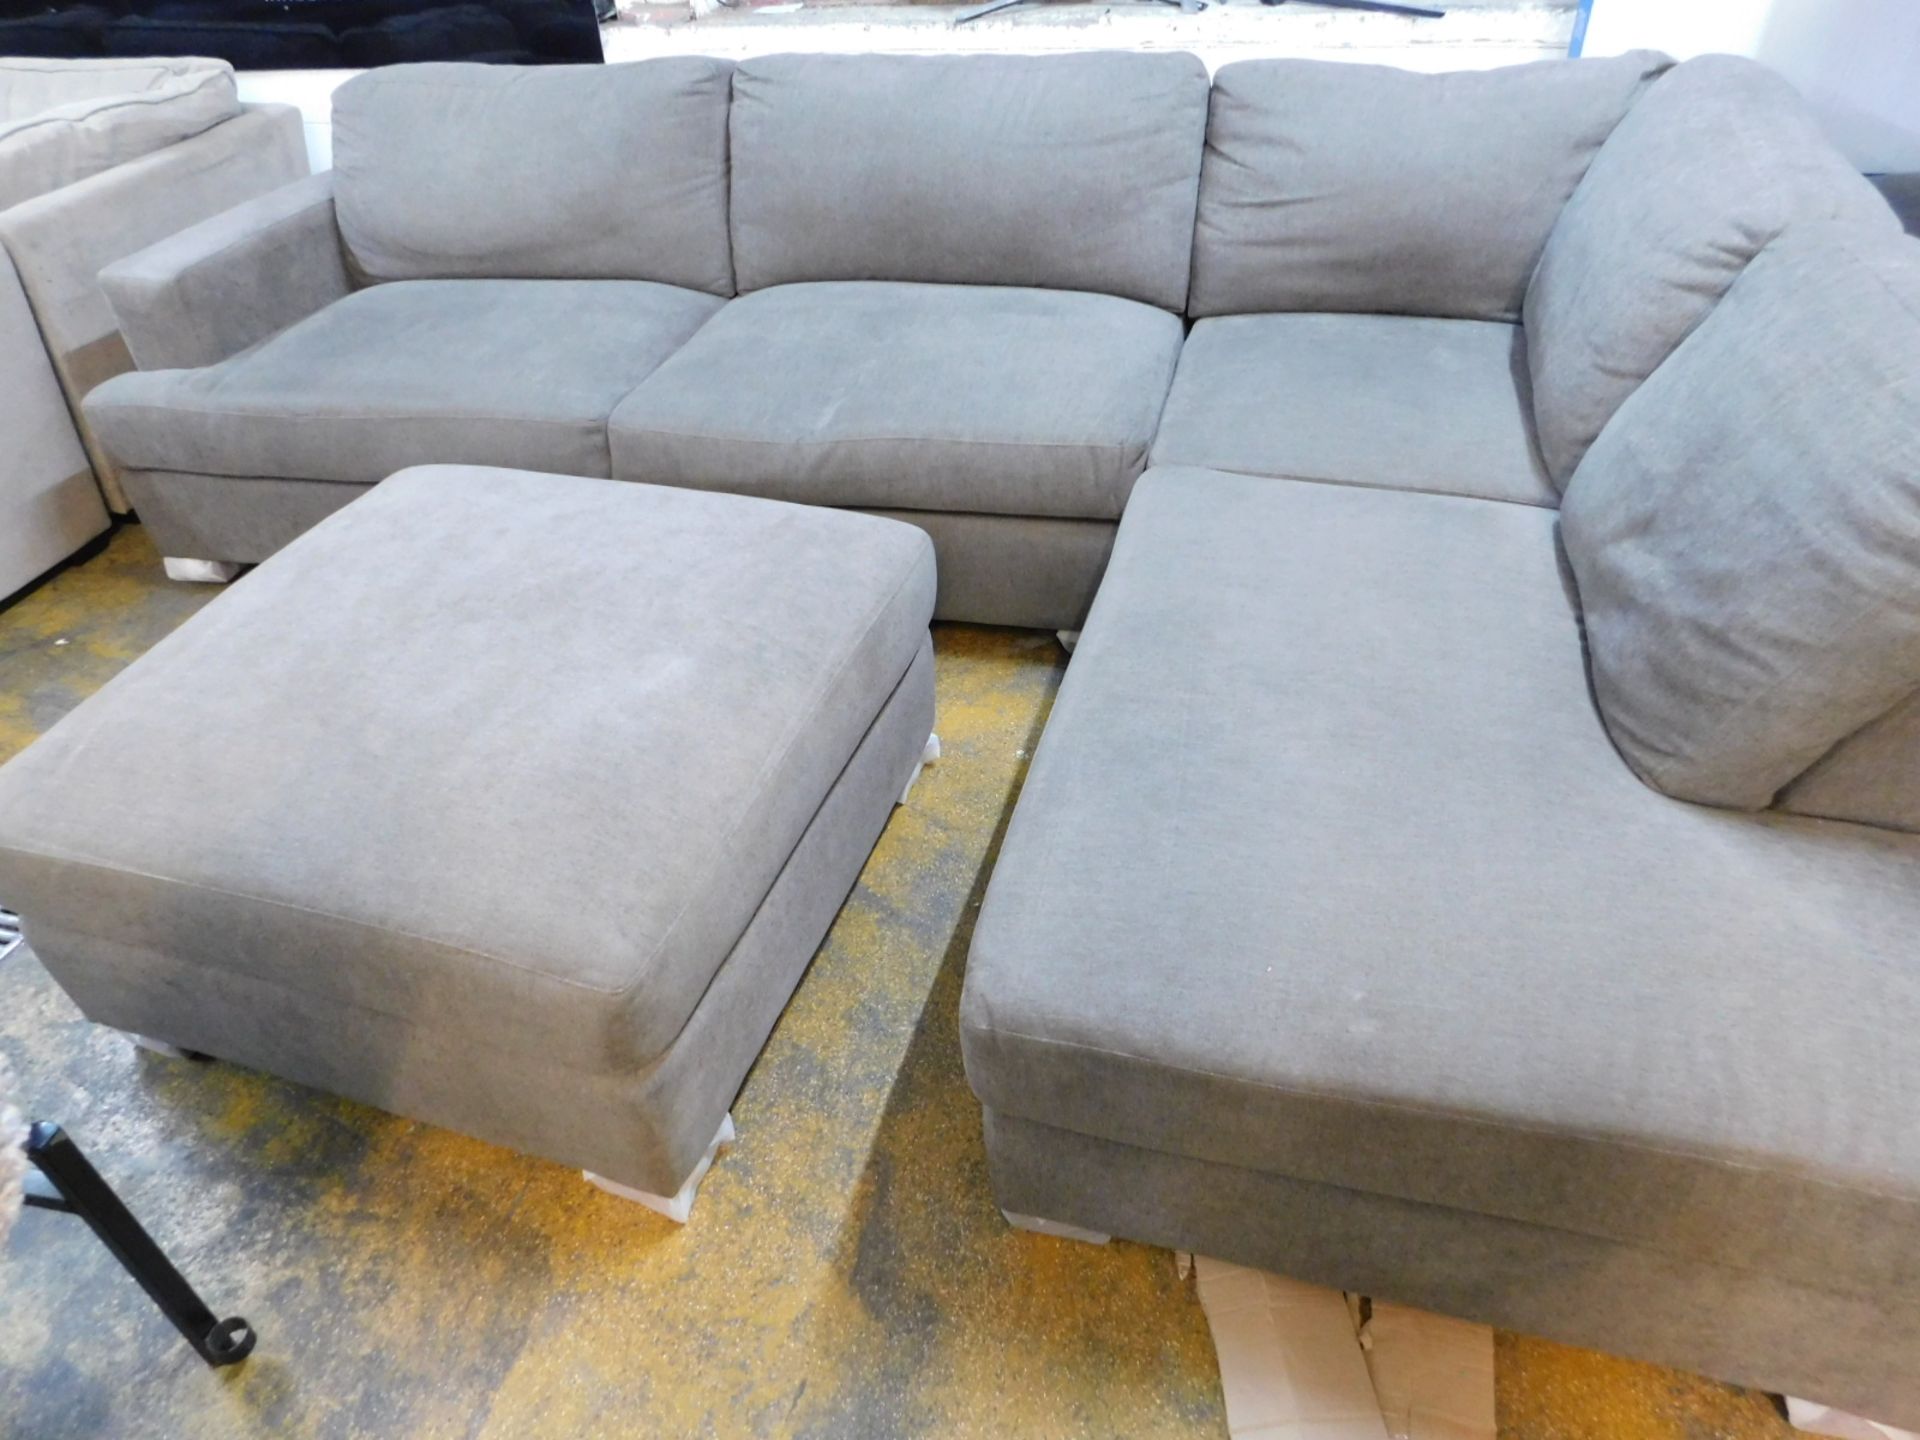 1 KOLBY GREY 3 PIECE FABRIC SECTIONAL SOFA WITH OTTOMAN RRP £999